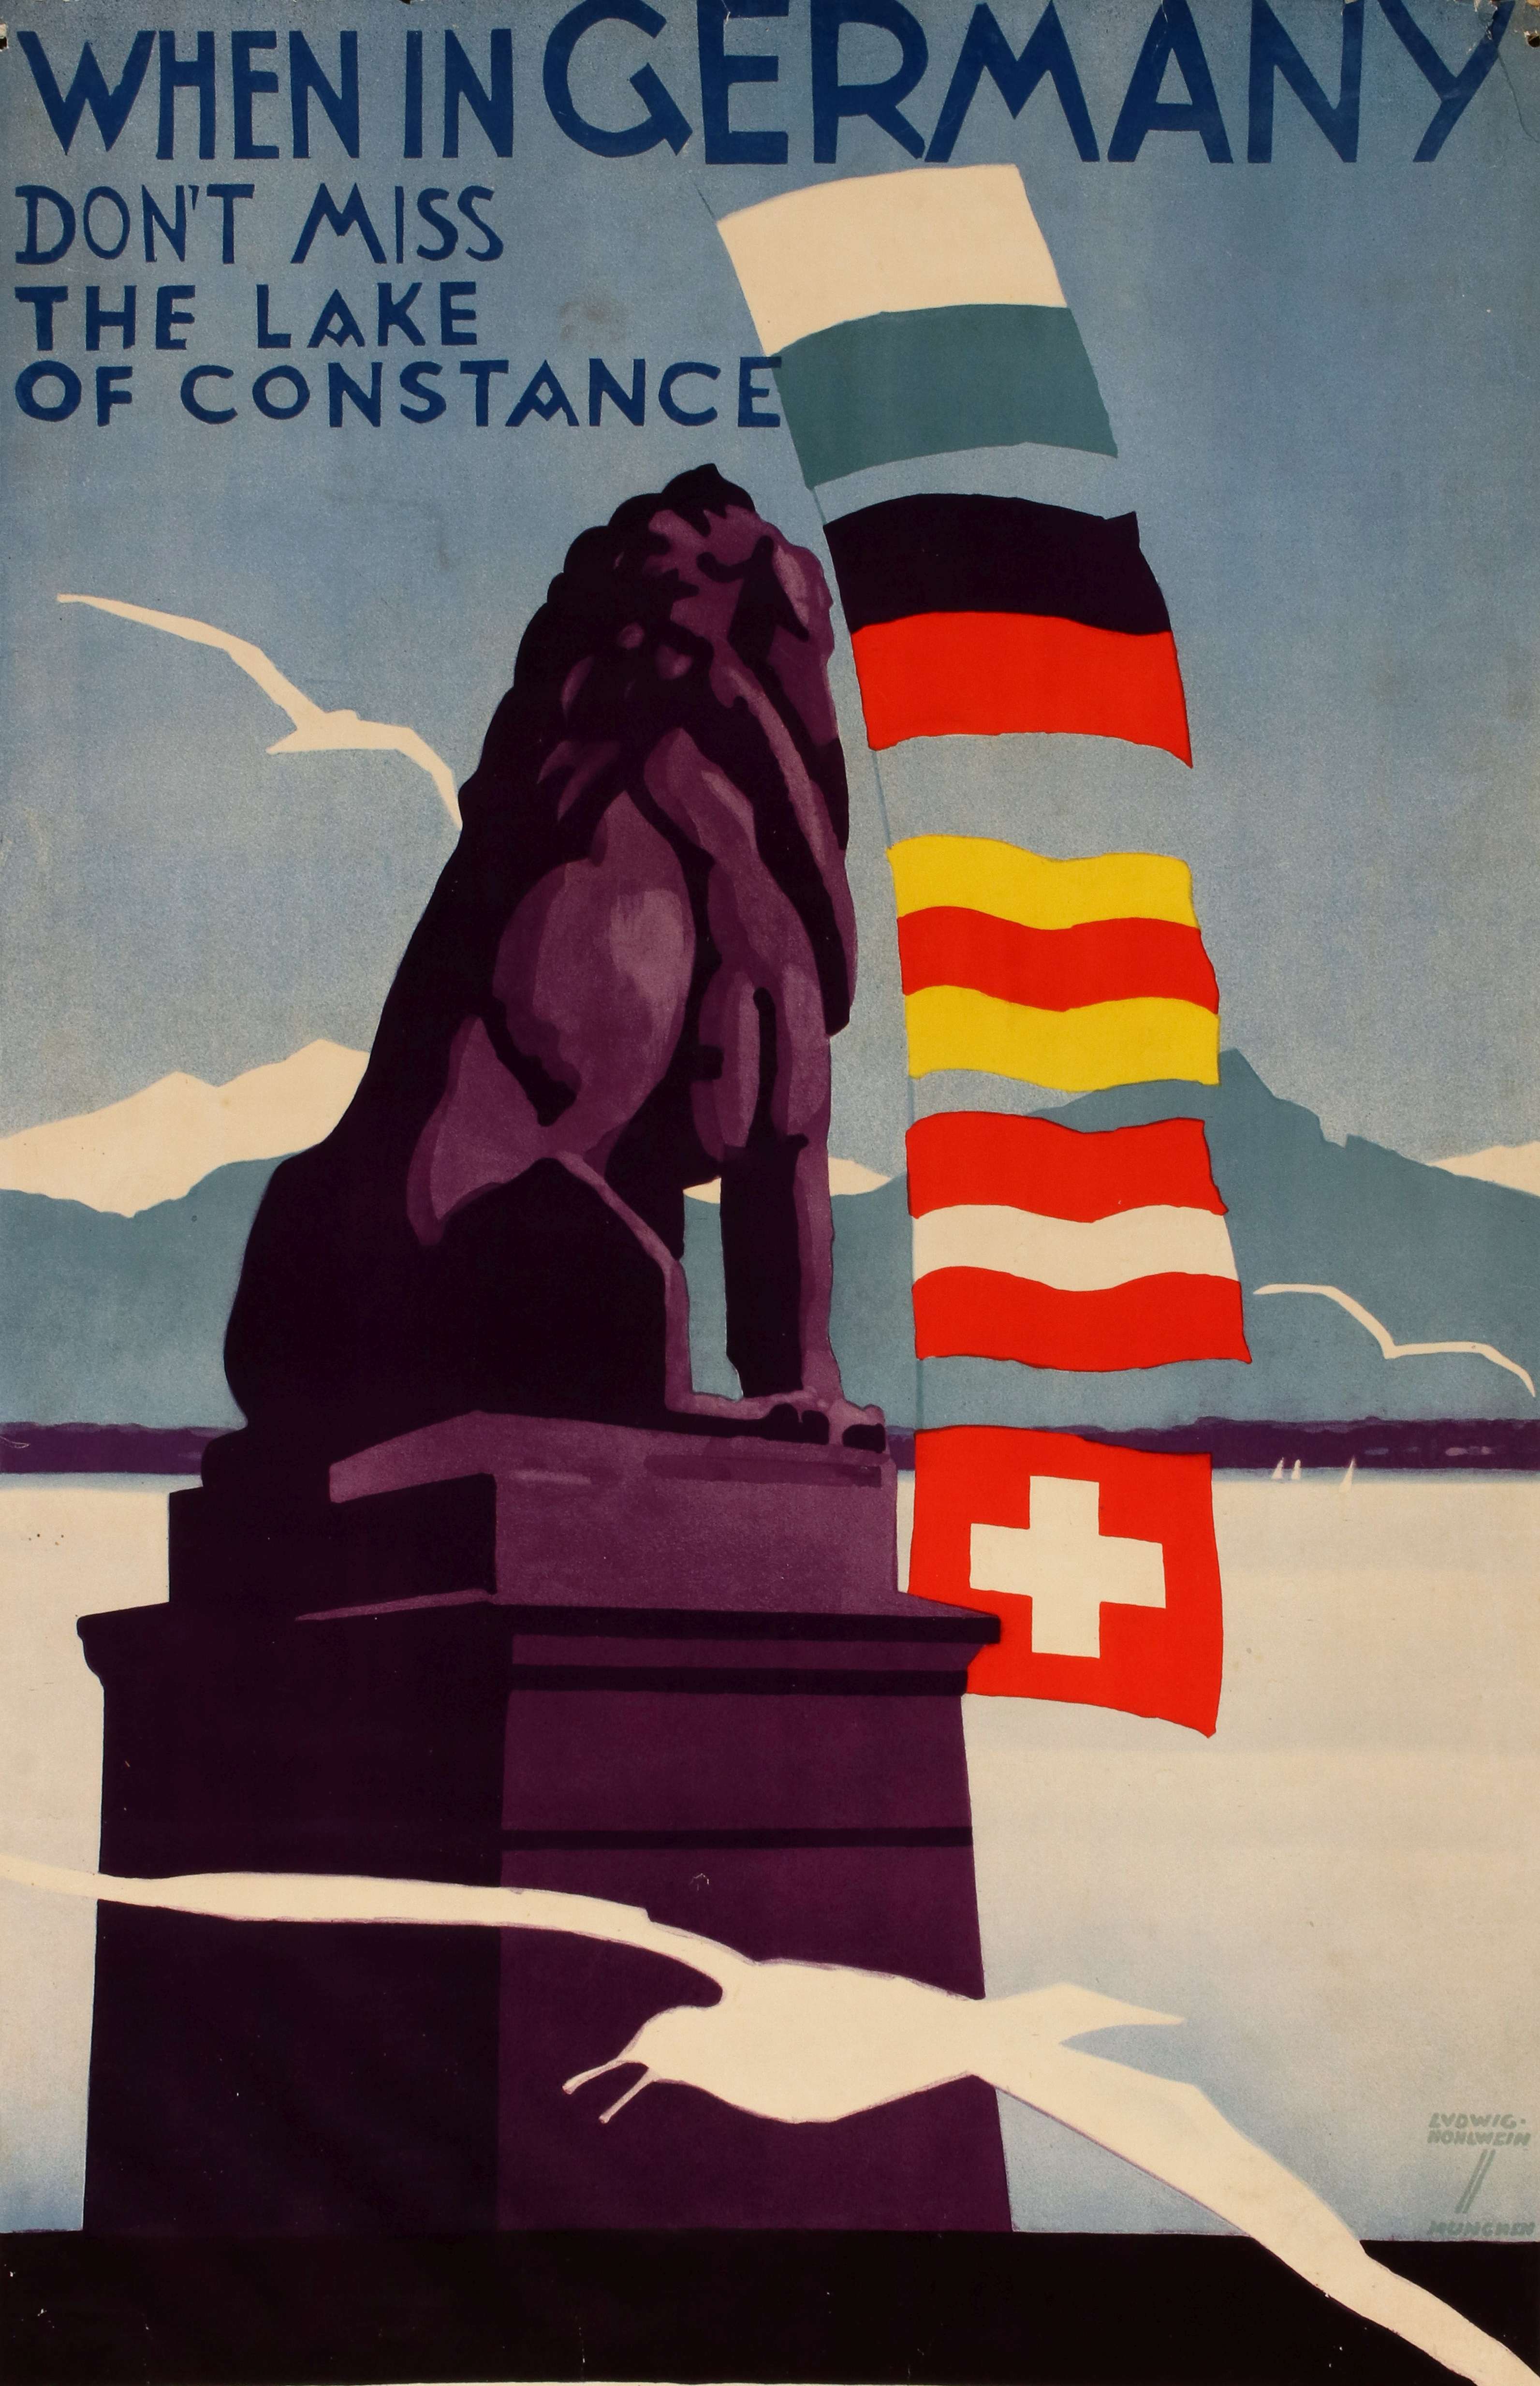 A 1930s GERMAN TRAVEL POSTER AND SOVIET WARNING POSTER